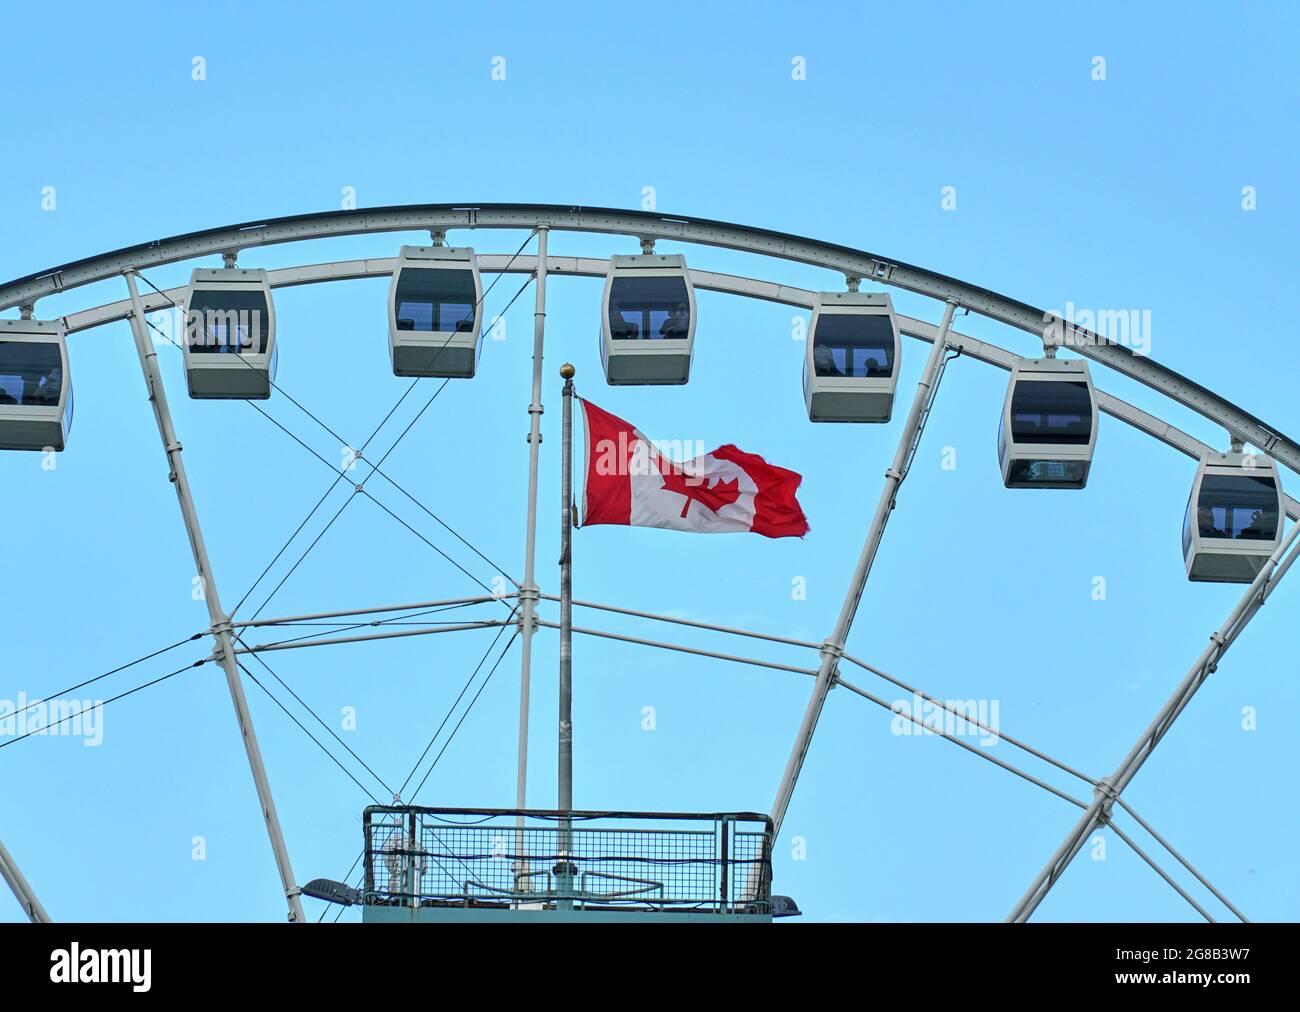 Canada, Montreal - July 11, 2021: Scenic view of ferris wheel La Grande Roue de Montreal in Old Port of Montreal over blue skies and clouds. The Old P Stock Photo